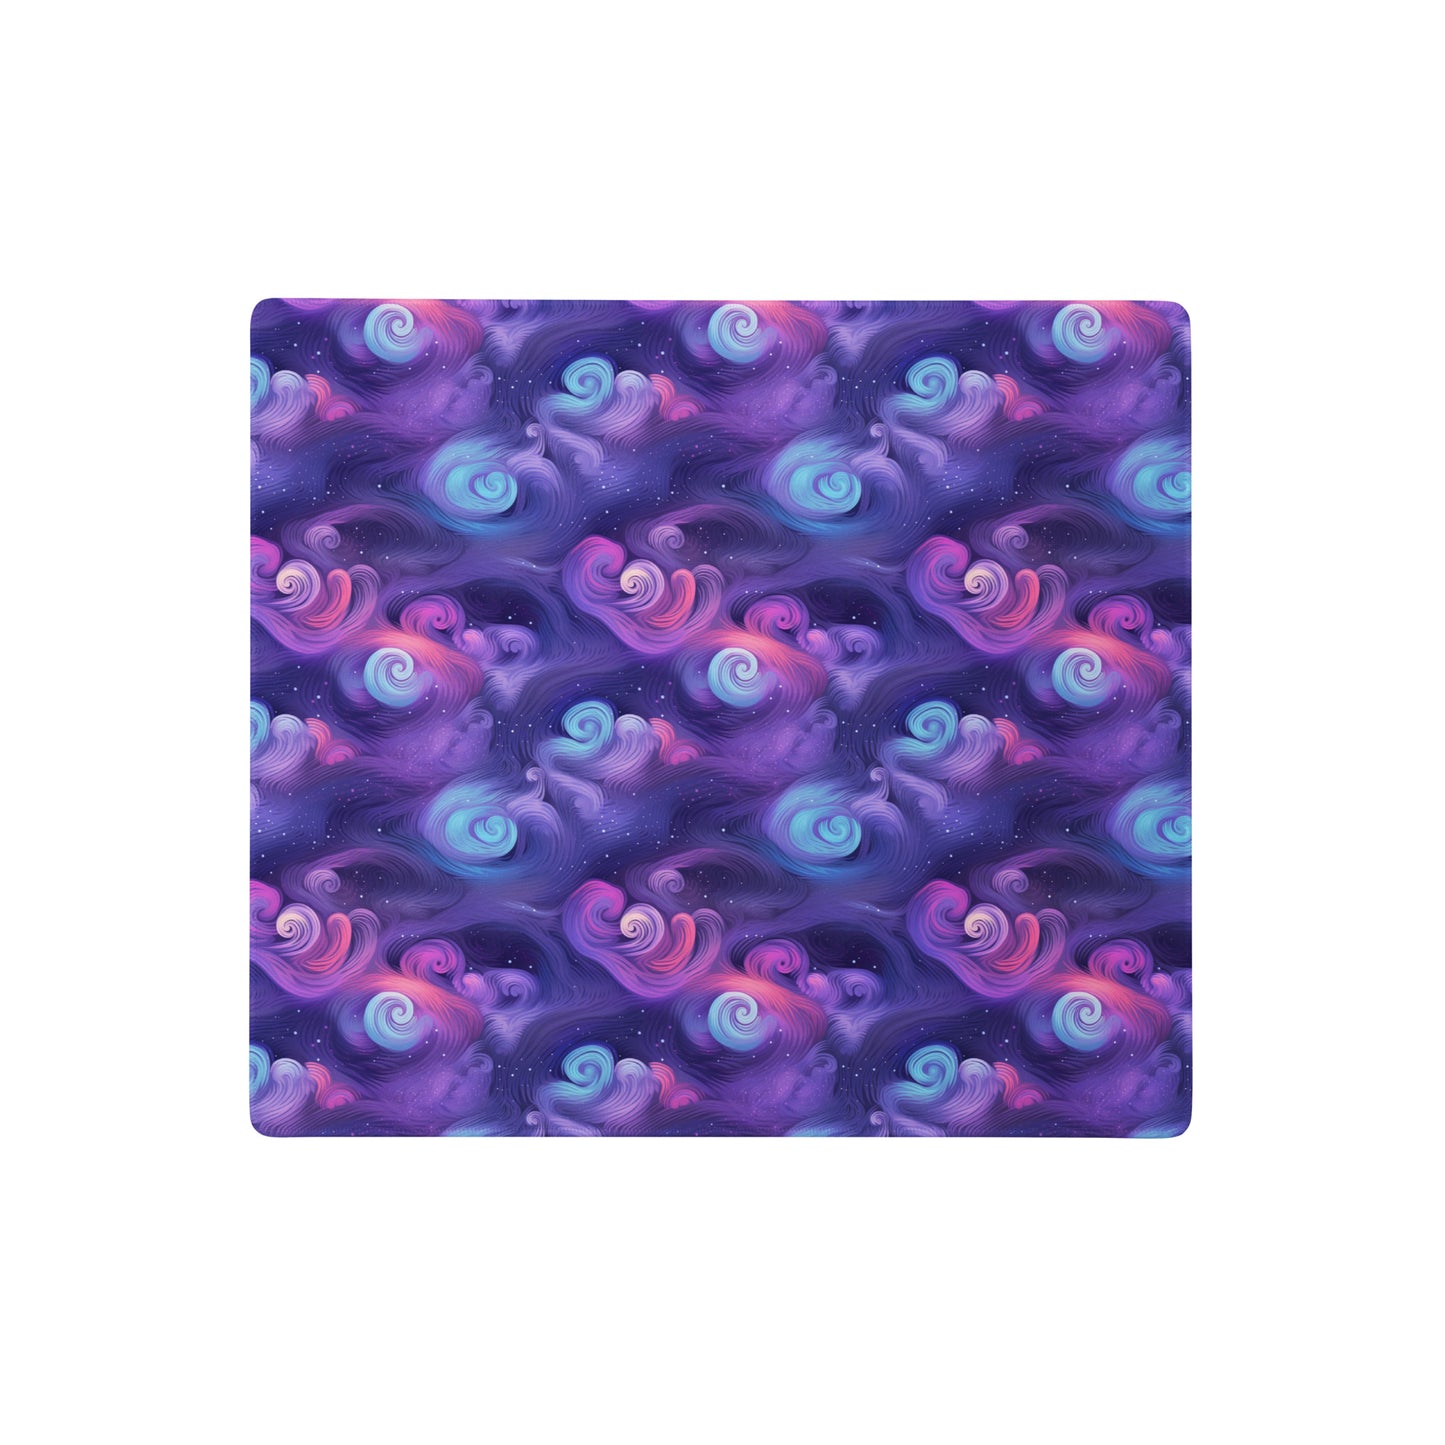 A 18" x 16" desk pad with fluffy clouds and stars on it. Blue and Purple in color